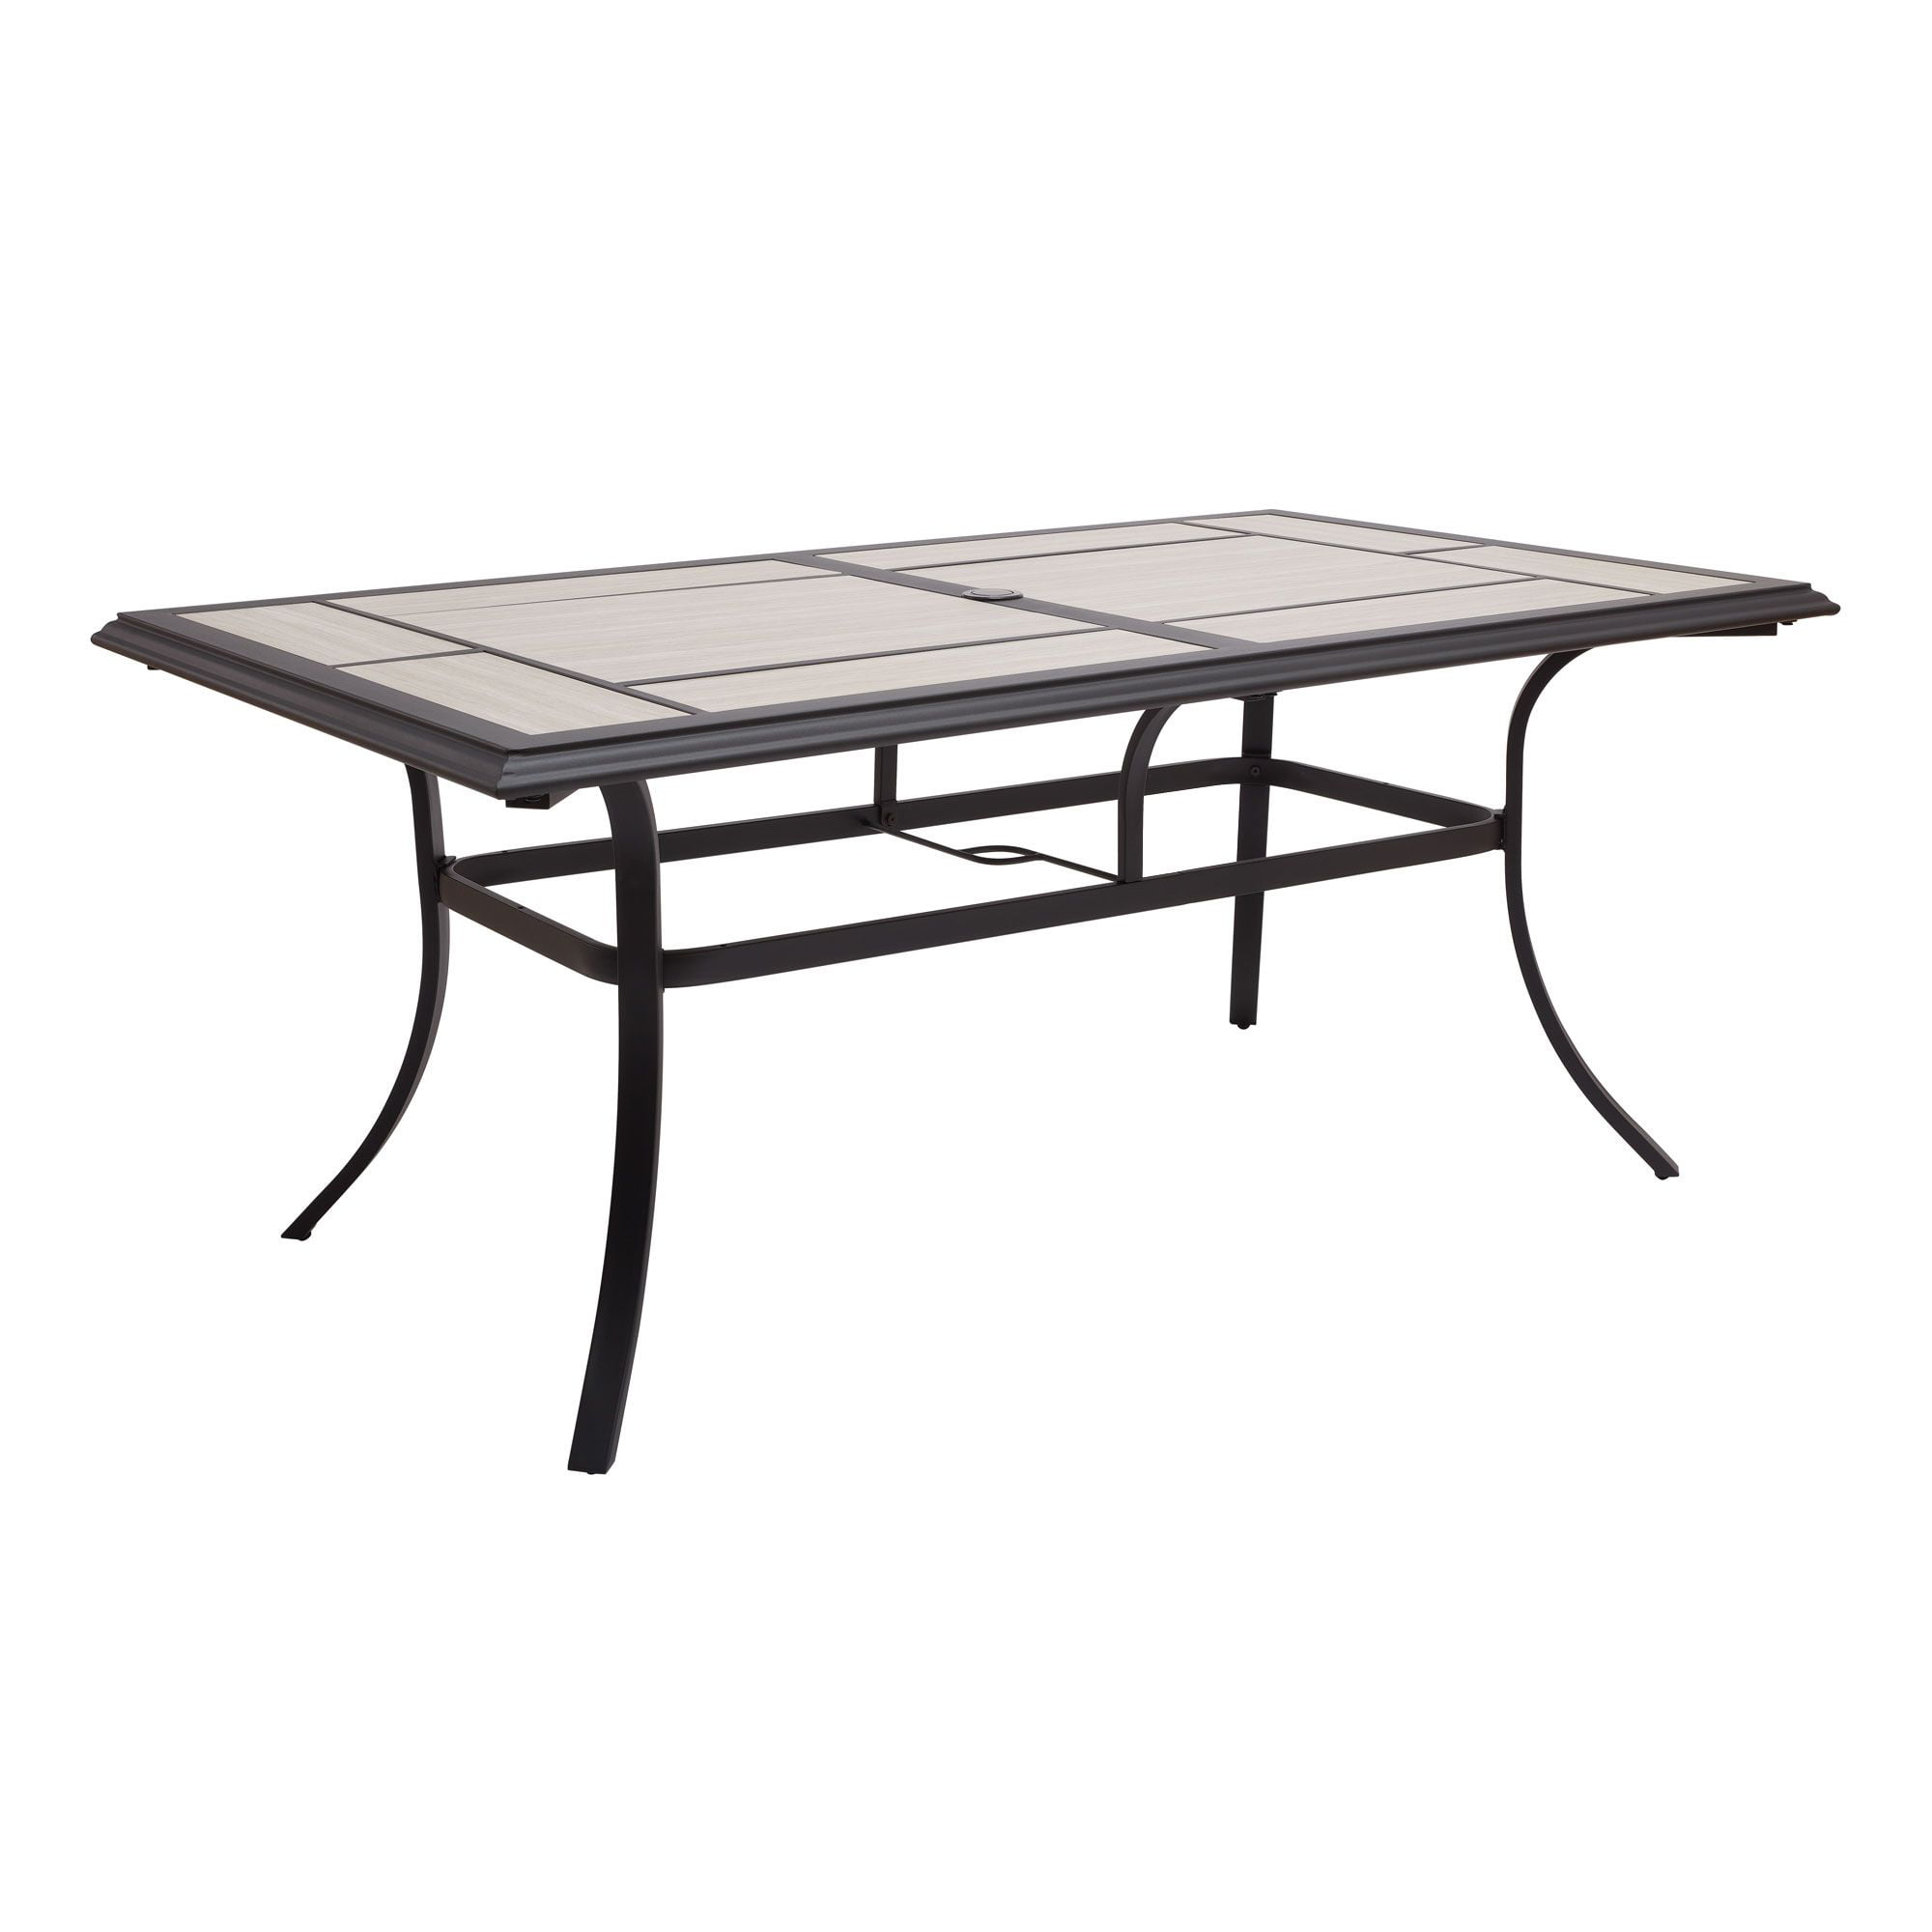 Better Homes & Gardens Newport Outdoor Ceramic Tile Top Dining Table w/ Umbrella Hole (Gray) $100.00